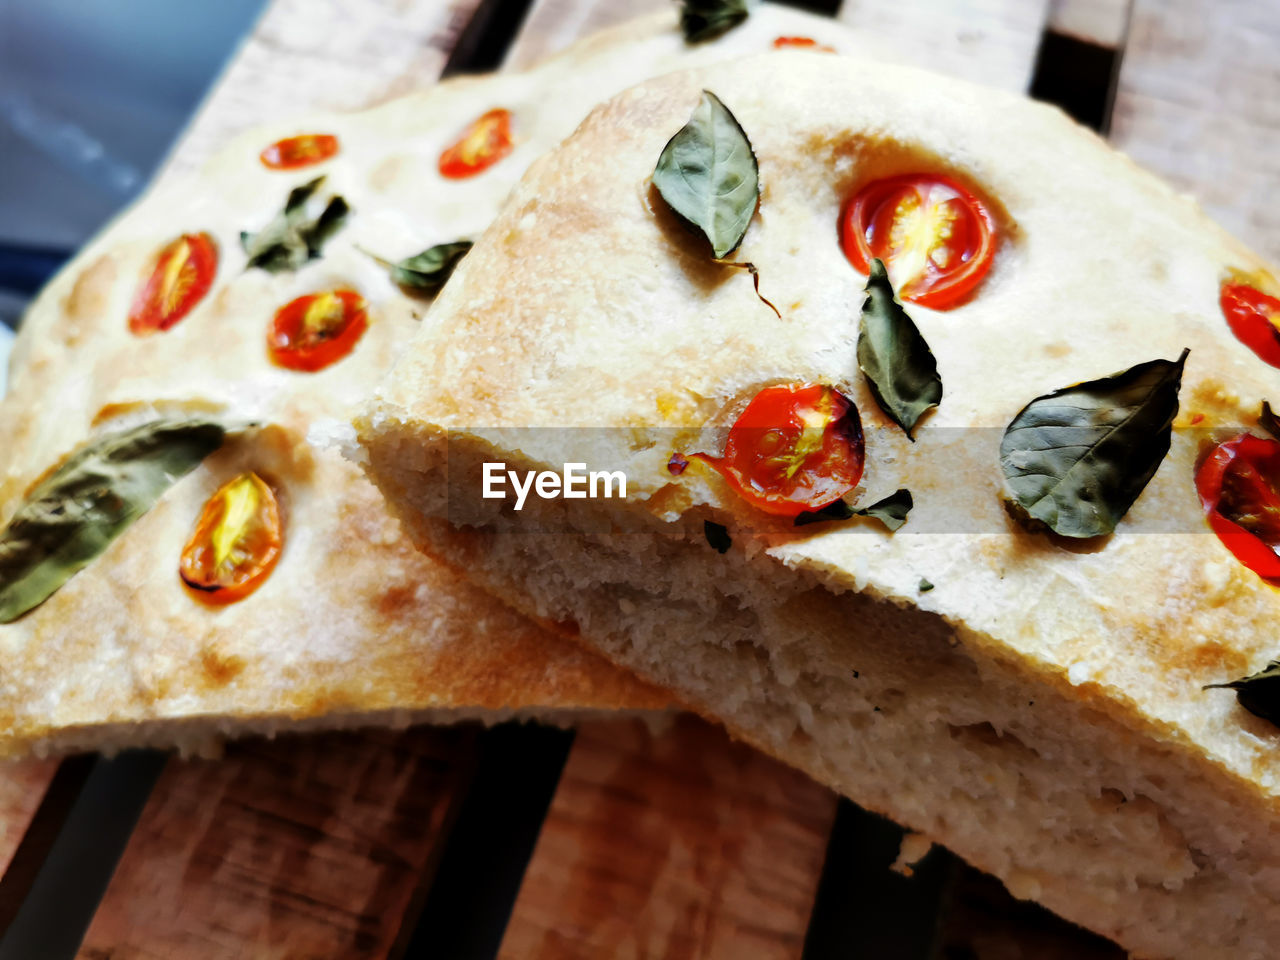 food, food and drink, dish, cuisine, pizza, fast food, italian food, freshness, vegetable, cheese, no people, fruit, dairy, close-up, olive, tomato, flatbread, healthy eating, produce, bread, indoors, high angle view, meal, slice, wood